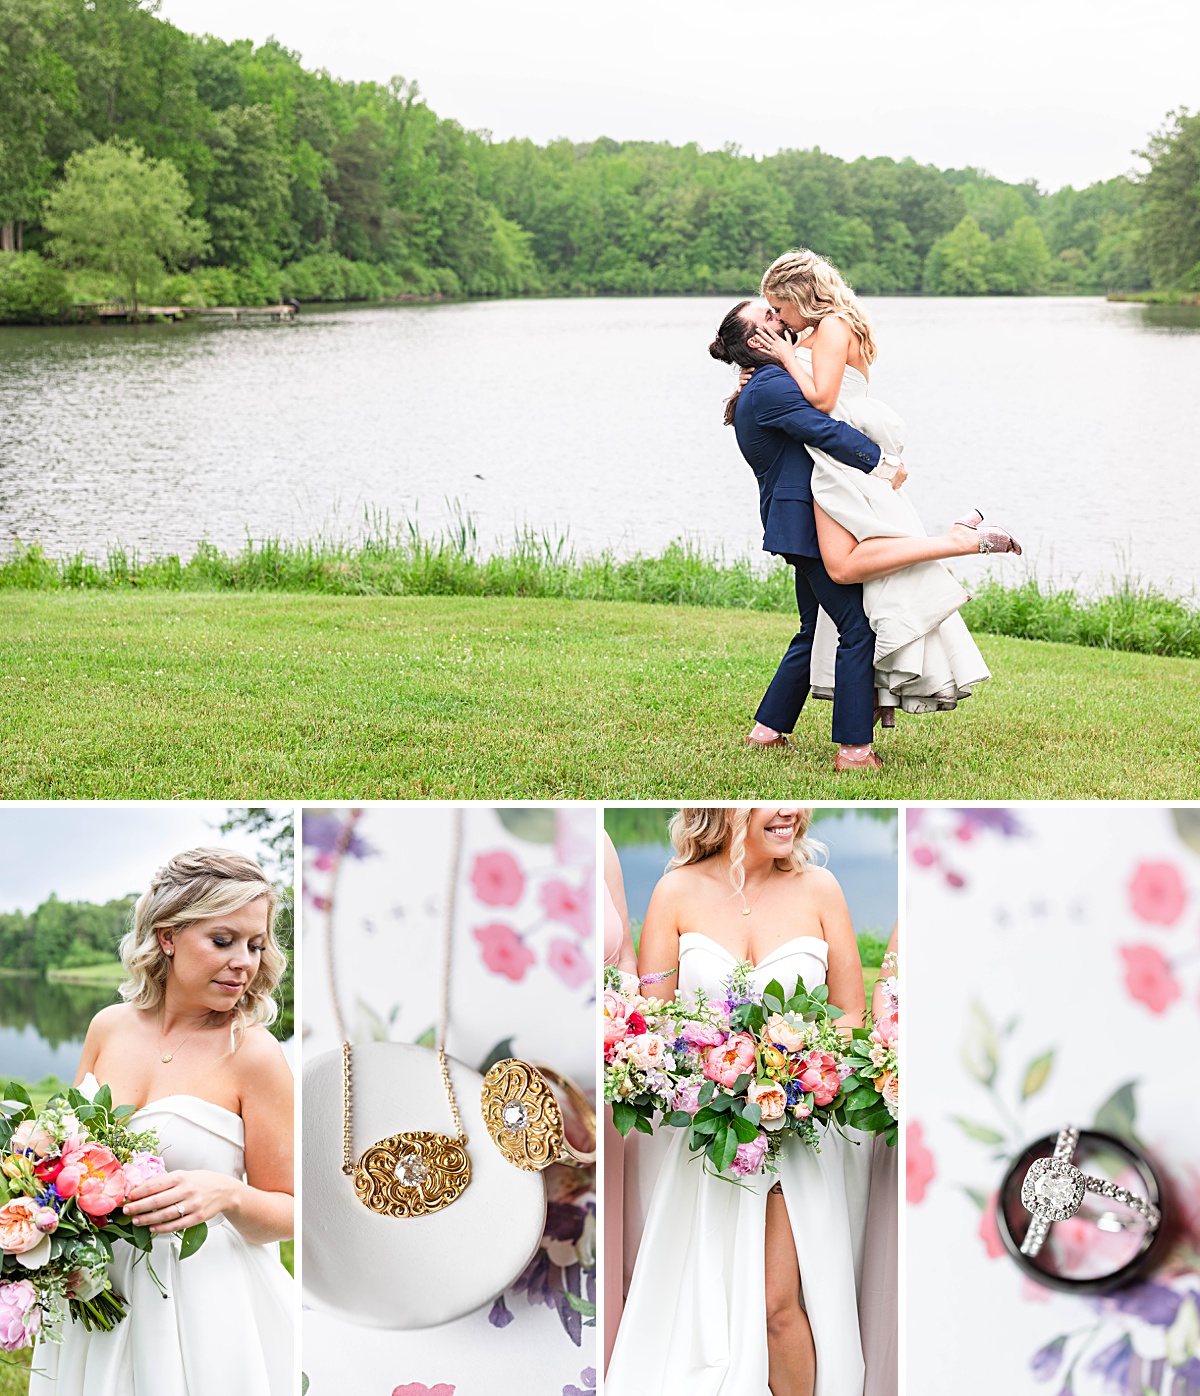 This rustic spring garden wedding at Running Mare Farm in Richmond, Virginia features some tear jerking first looks, a heavy thunderstorm, and a wedding dress that fits this bride's sassy personality!!